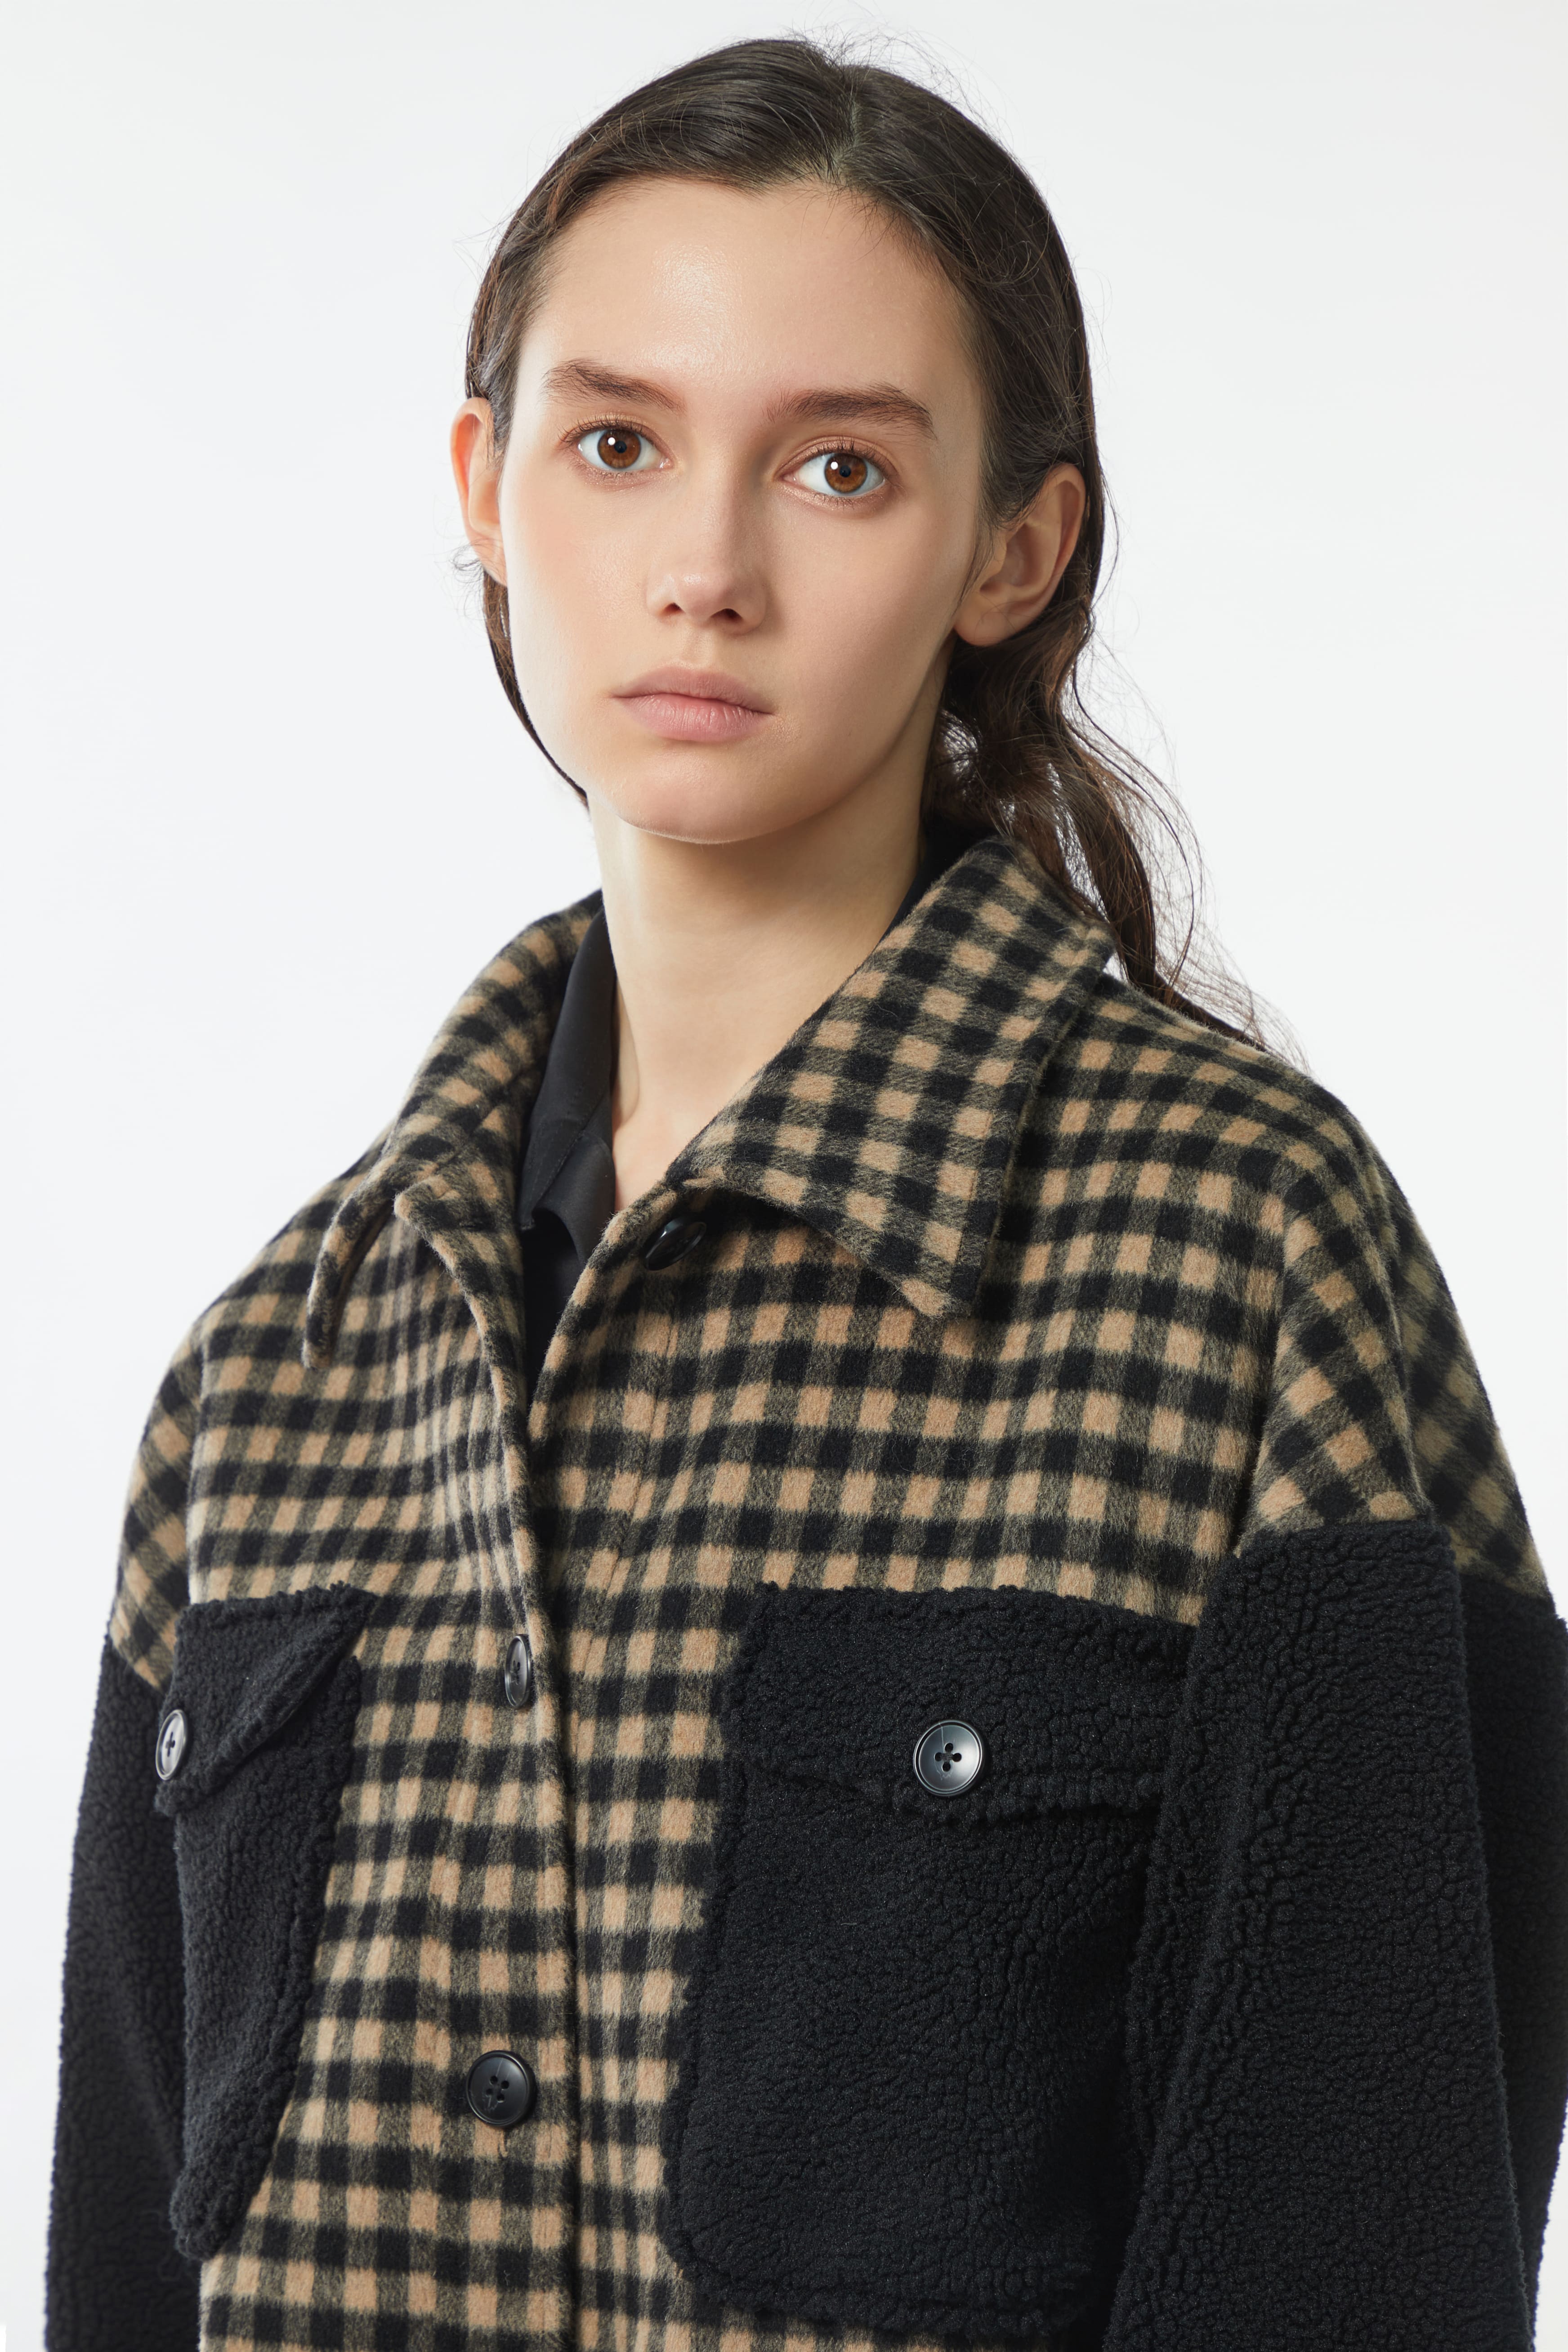 Khaki and Black Checkered Patchwork Flannel Shirt Coat - By Quaint